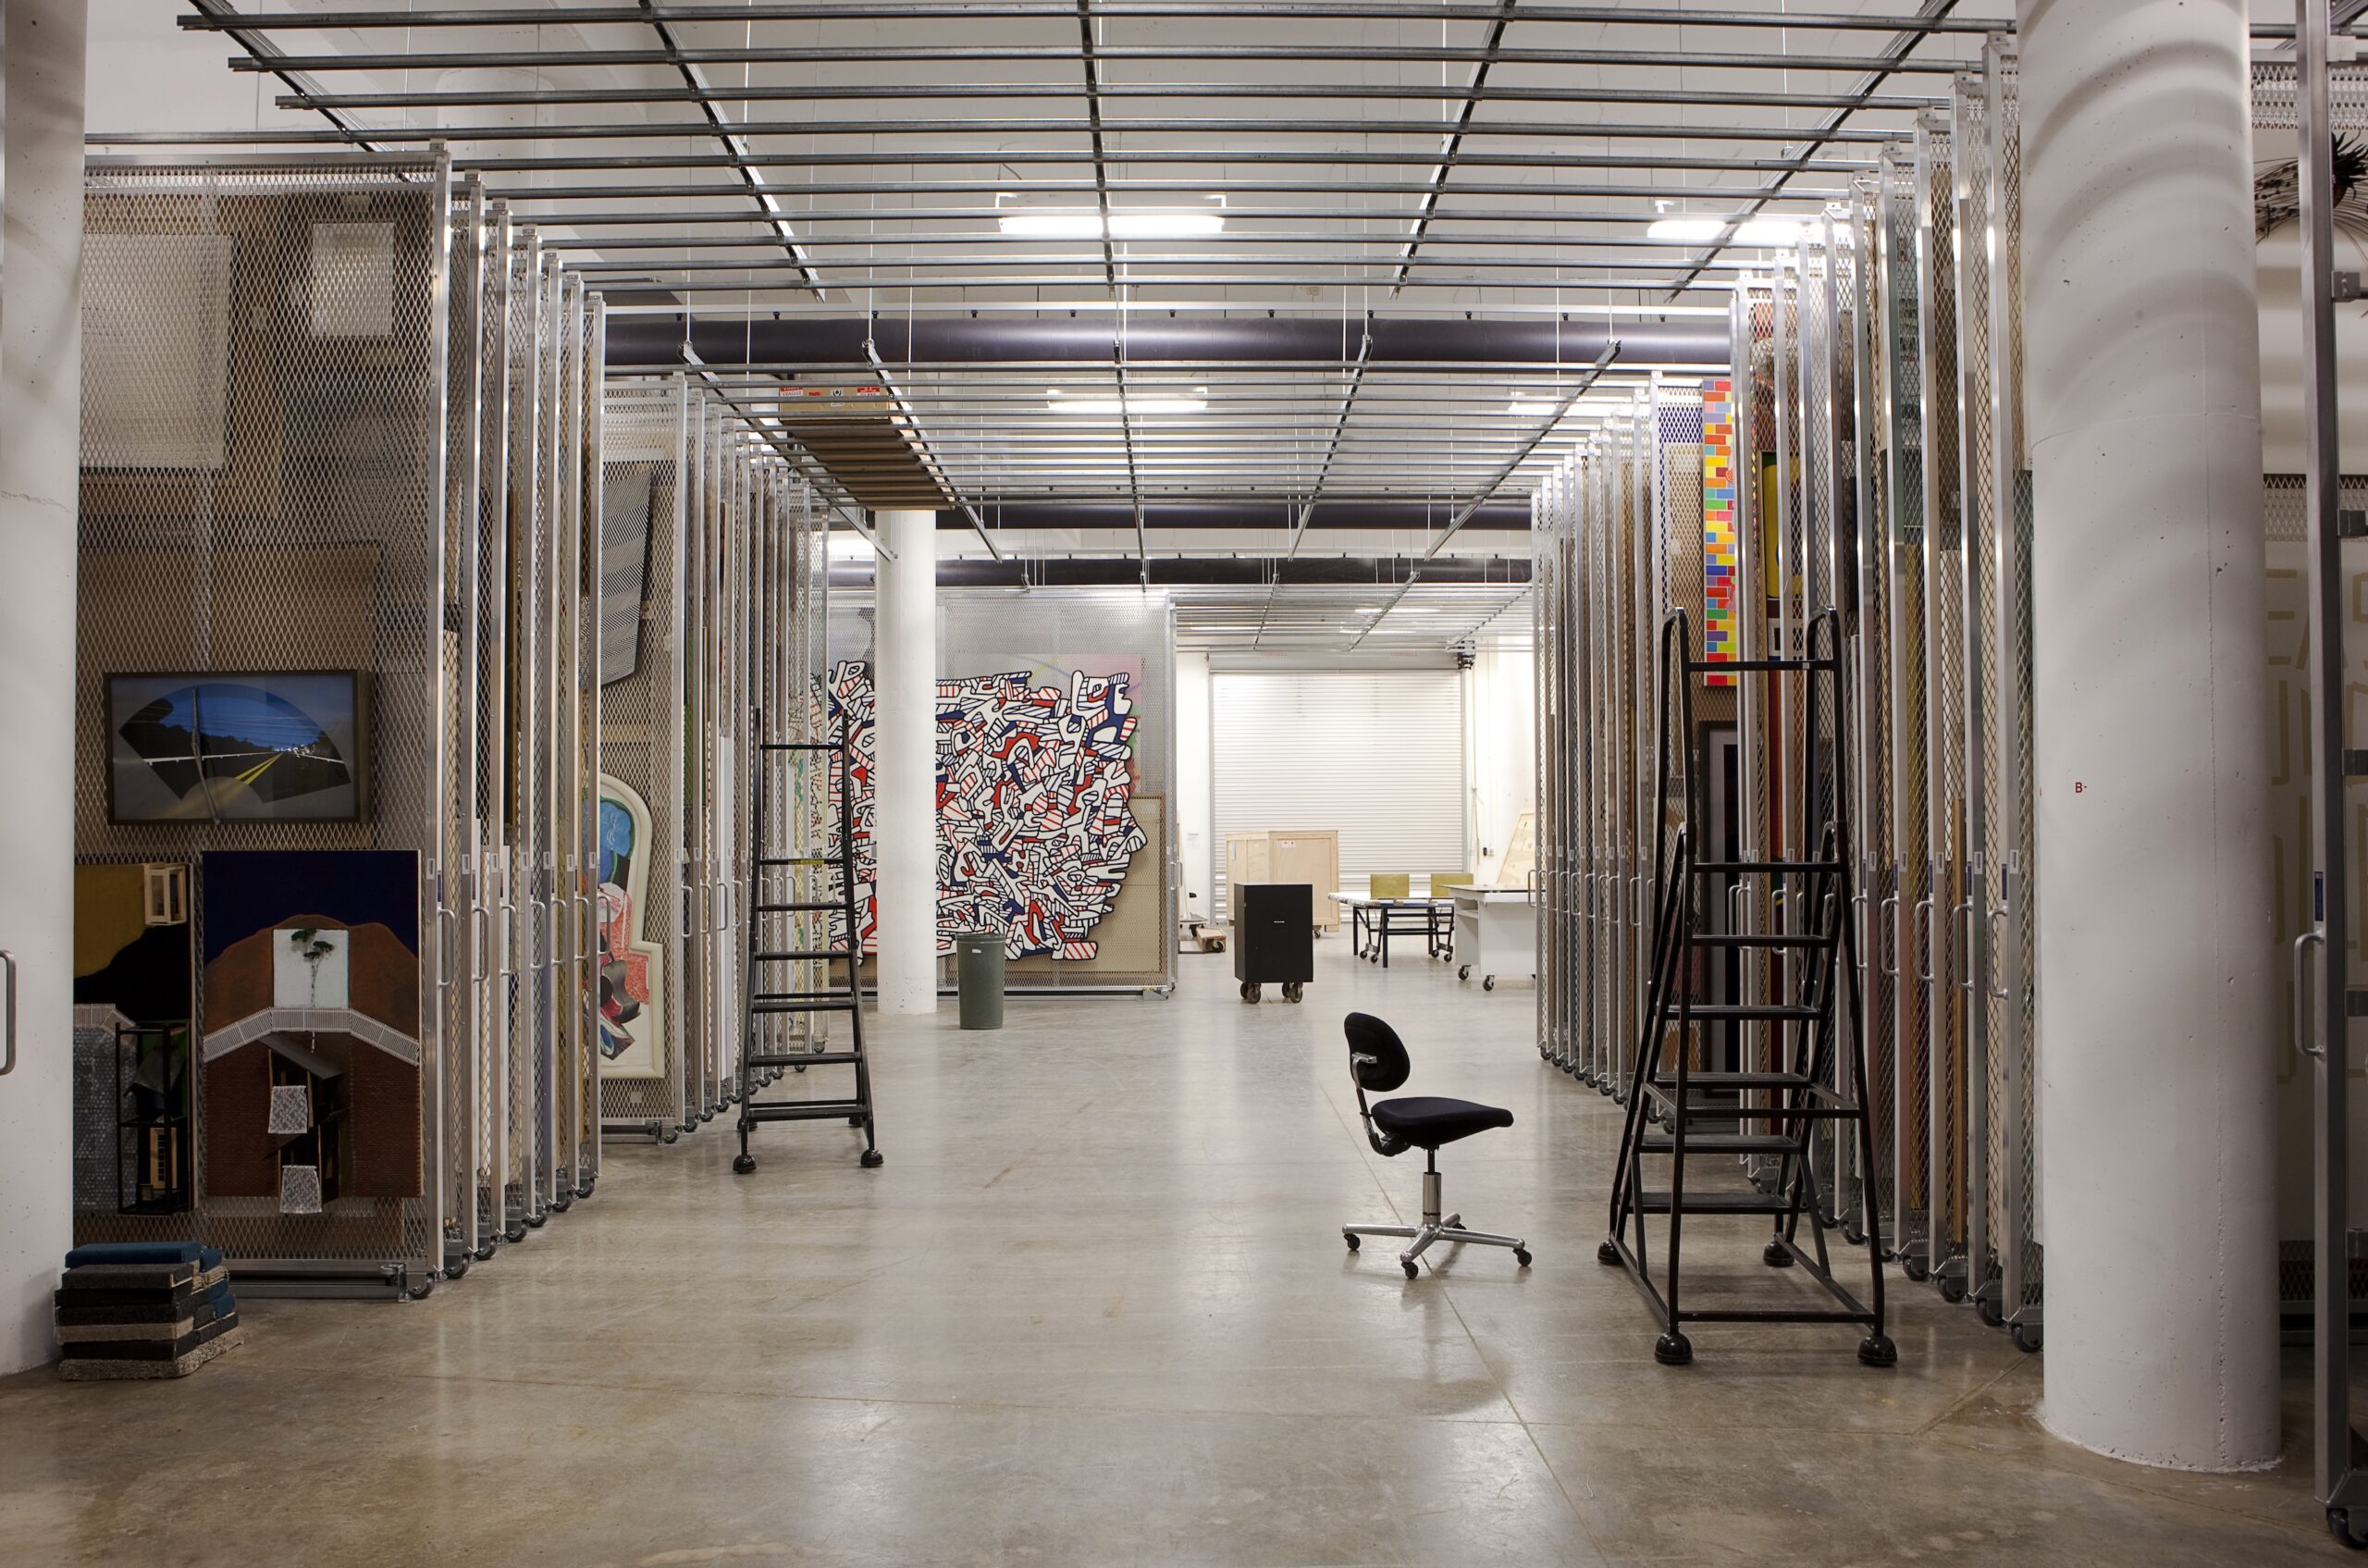 Art storage, with many framed 2D pieces hung in dense racks, with chair, ladder, concrete floor, and fluorescent lighting.